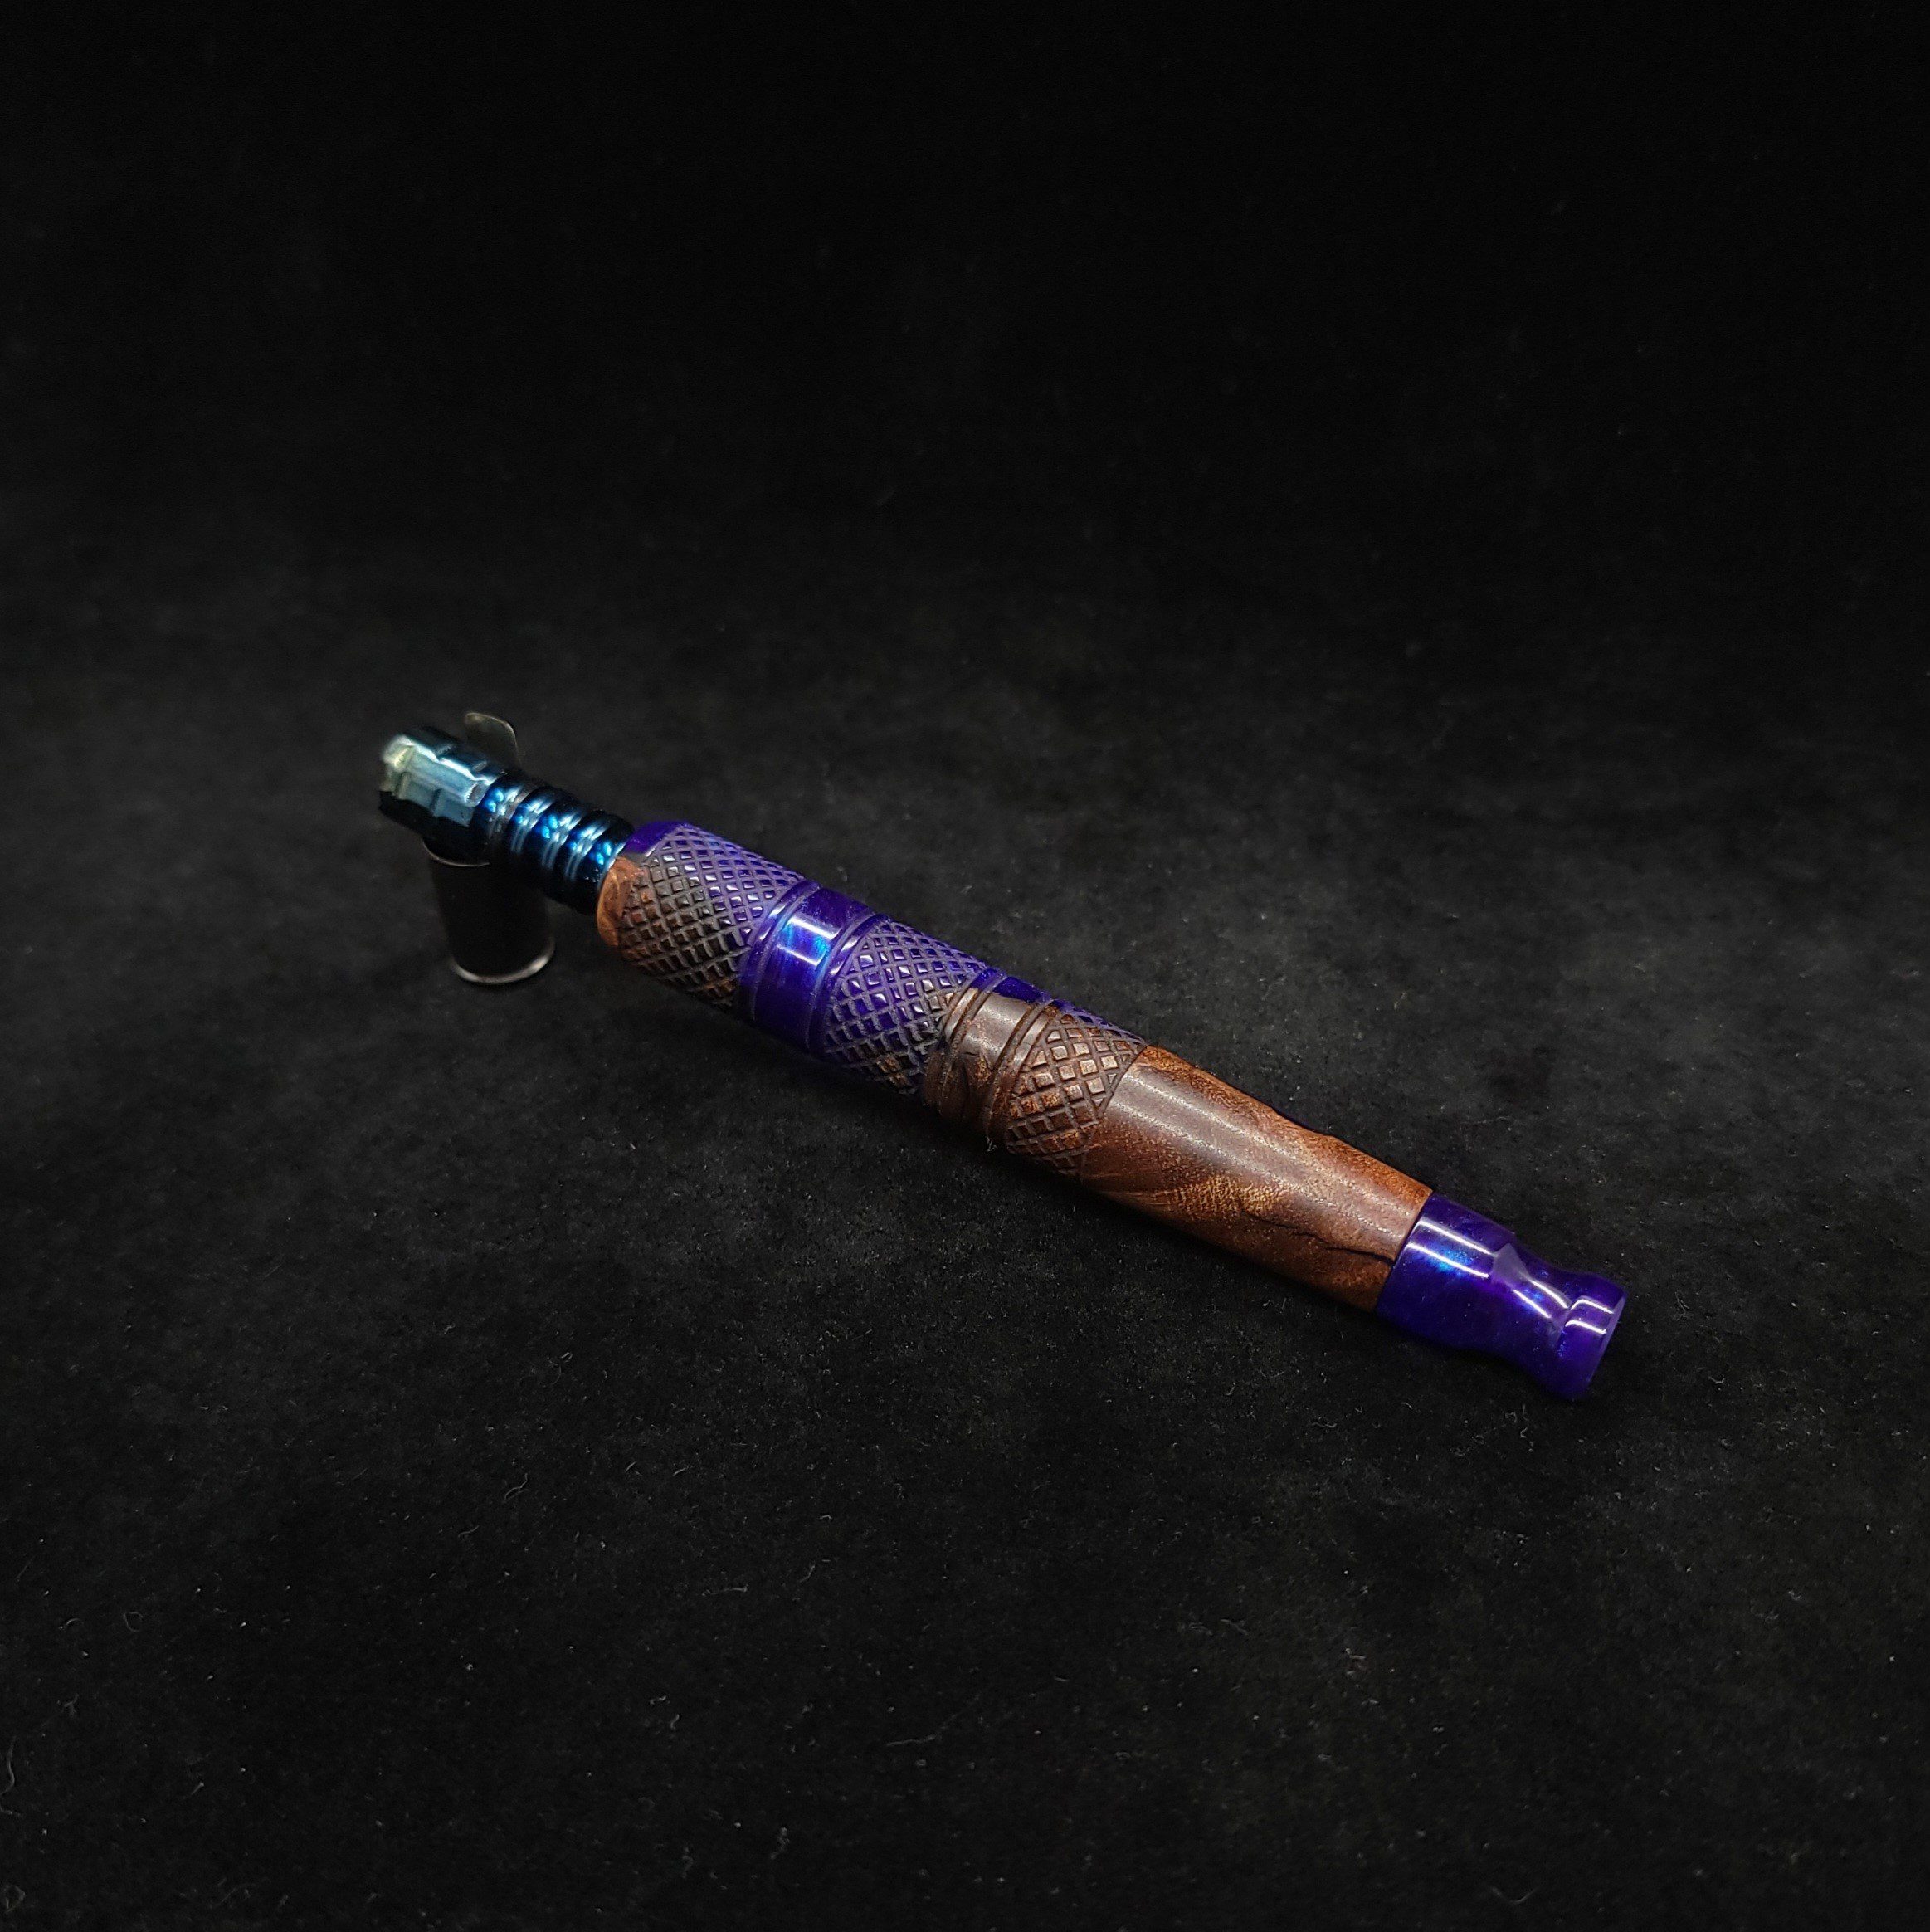 This image portrays High Class-Knurled XL Dynavap Stem/Walnut Burl Hybrid with Matching Mouthpiece by Dovetail Woodwork.